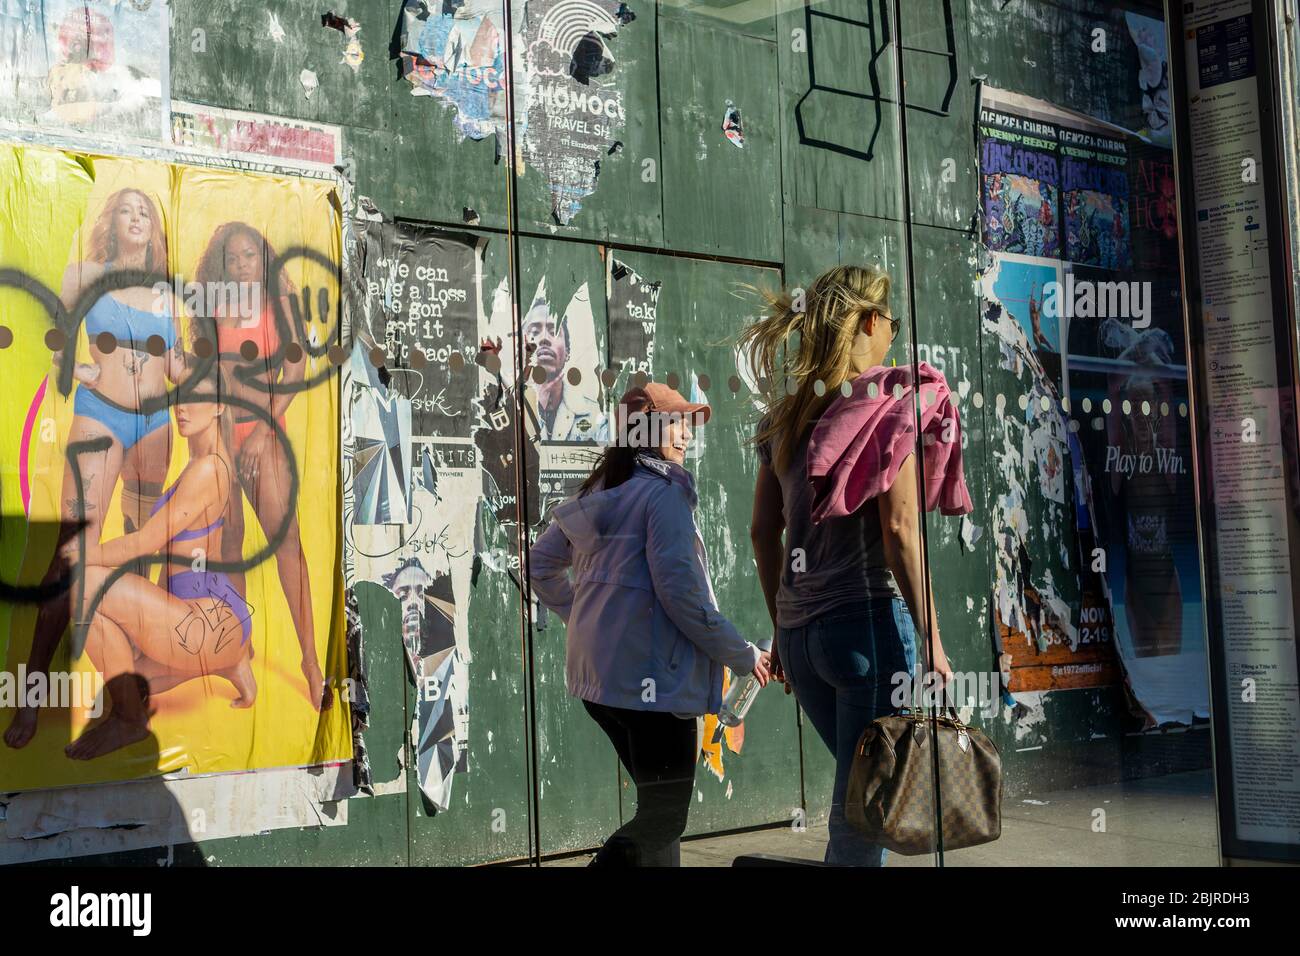 Unmasked women take advantage of the warm sunny weather in the Chelsea neighborhood of New York on Tuesday, April 28, 2020. (© Richard B. Levine) Stock Photo